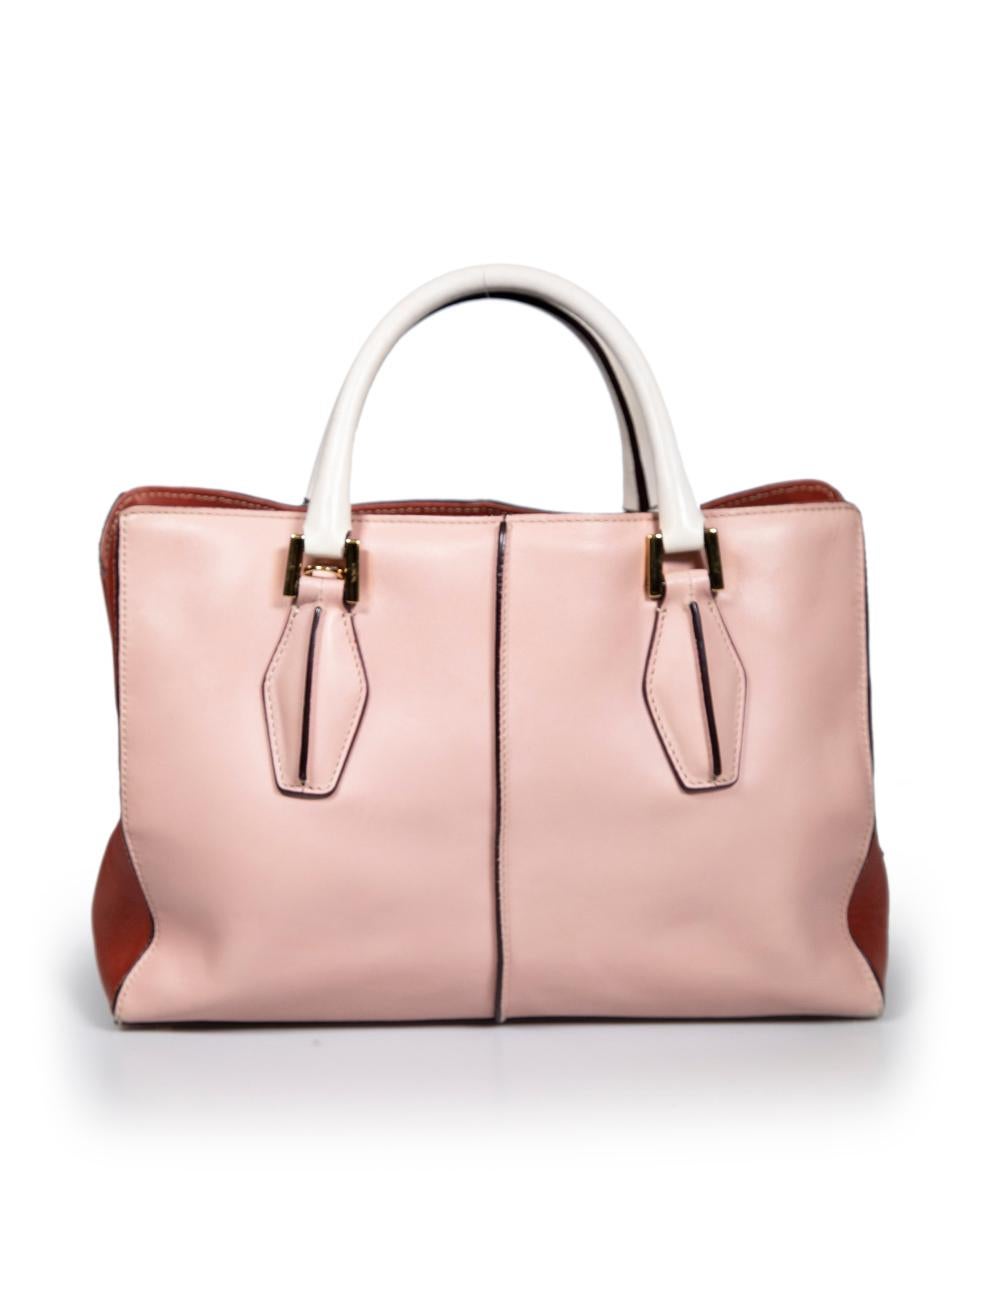 Tod's Pink Leather Two Tone Medium Handbag In Good Condition For Sale In London, GB